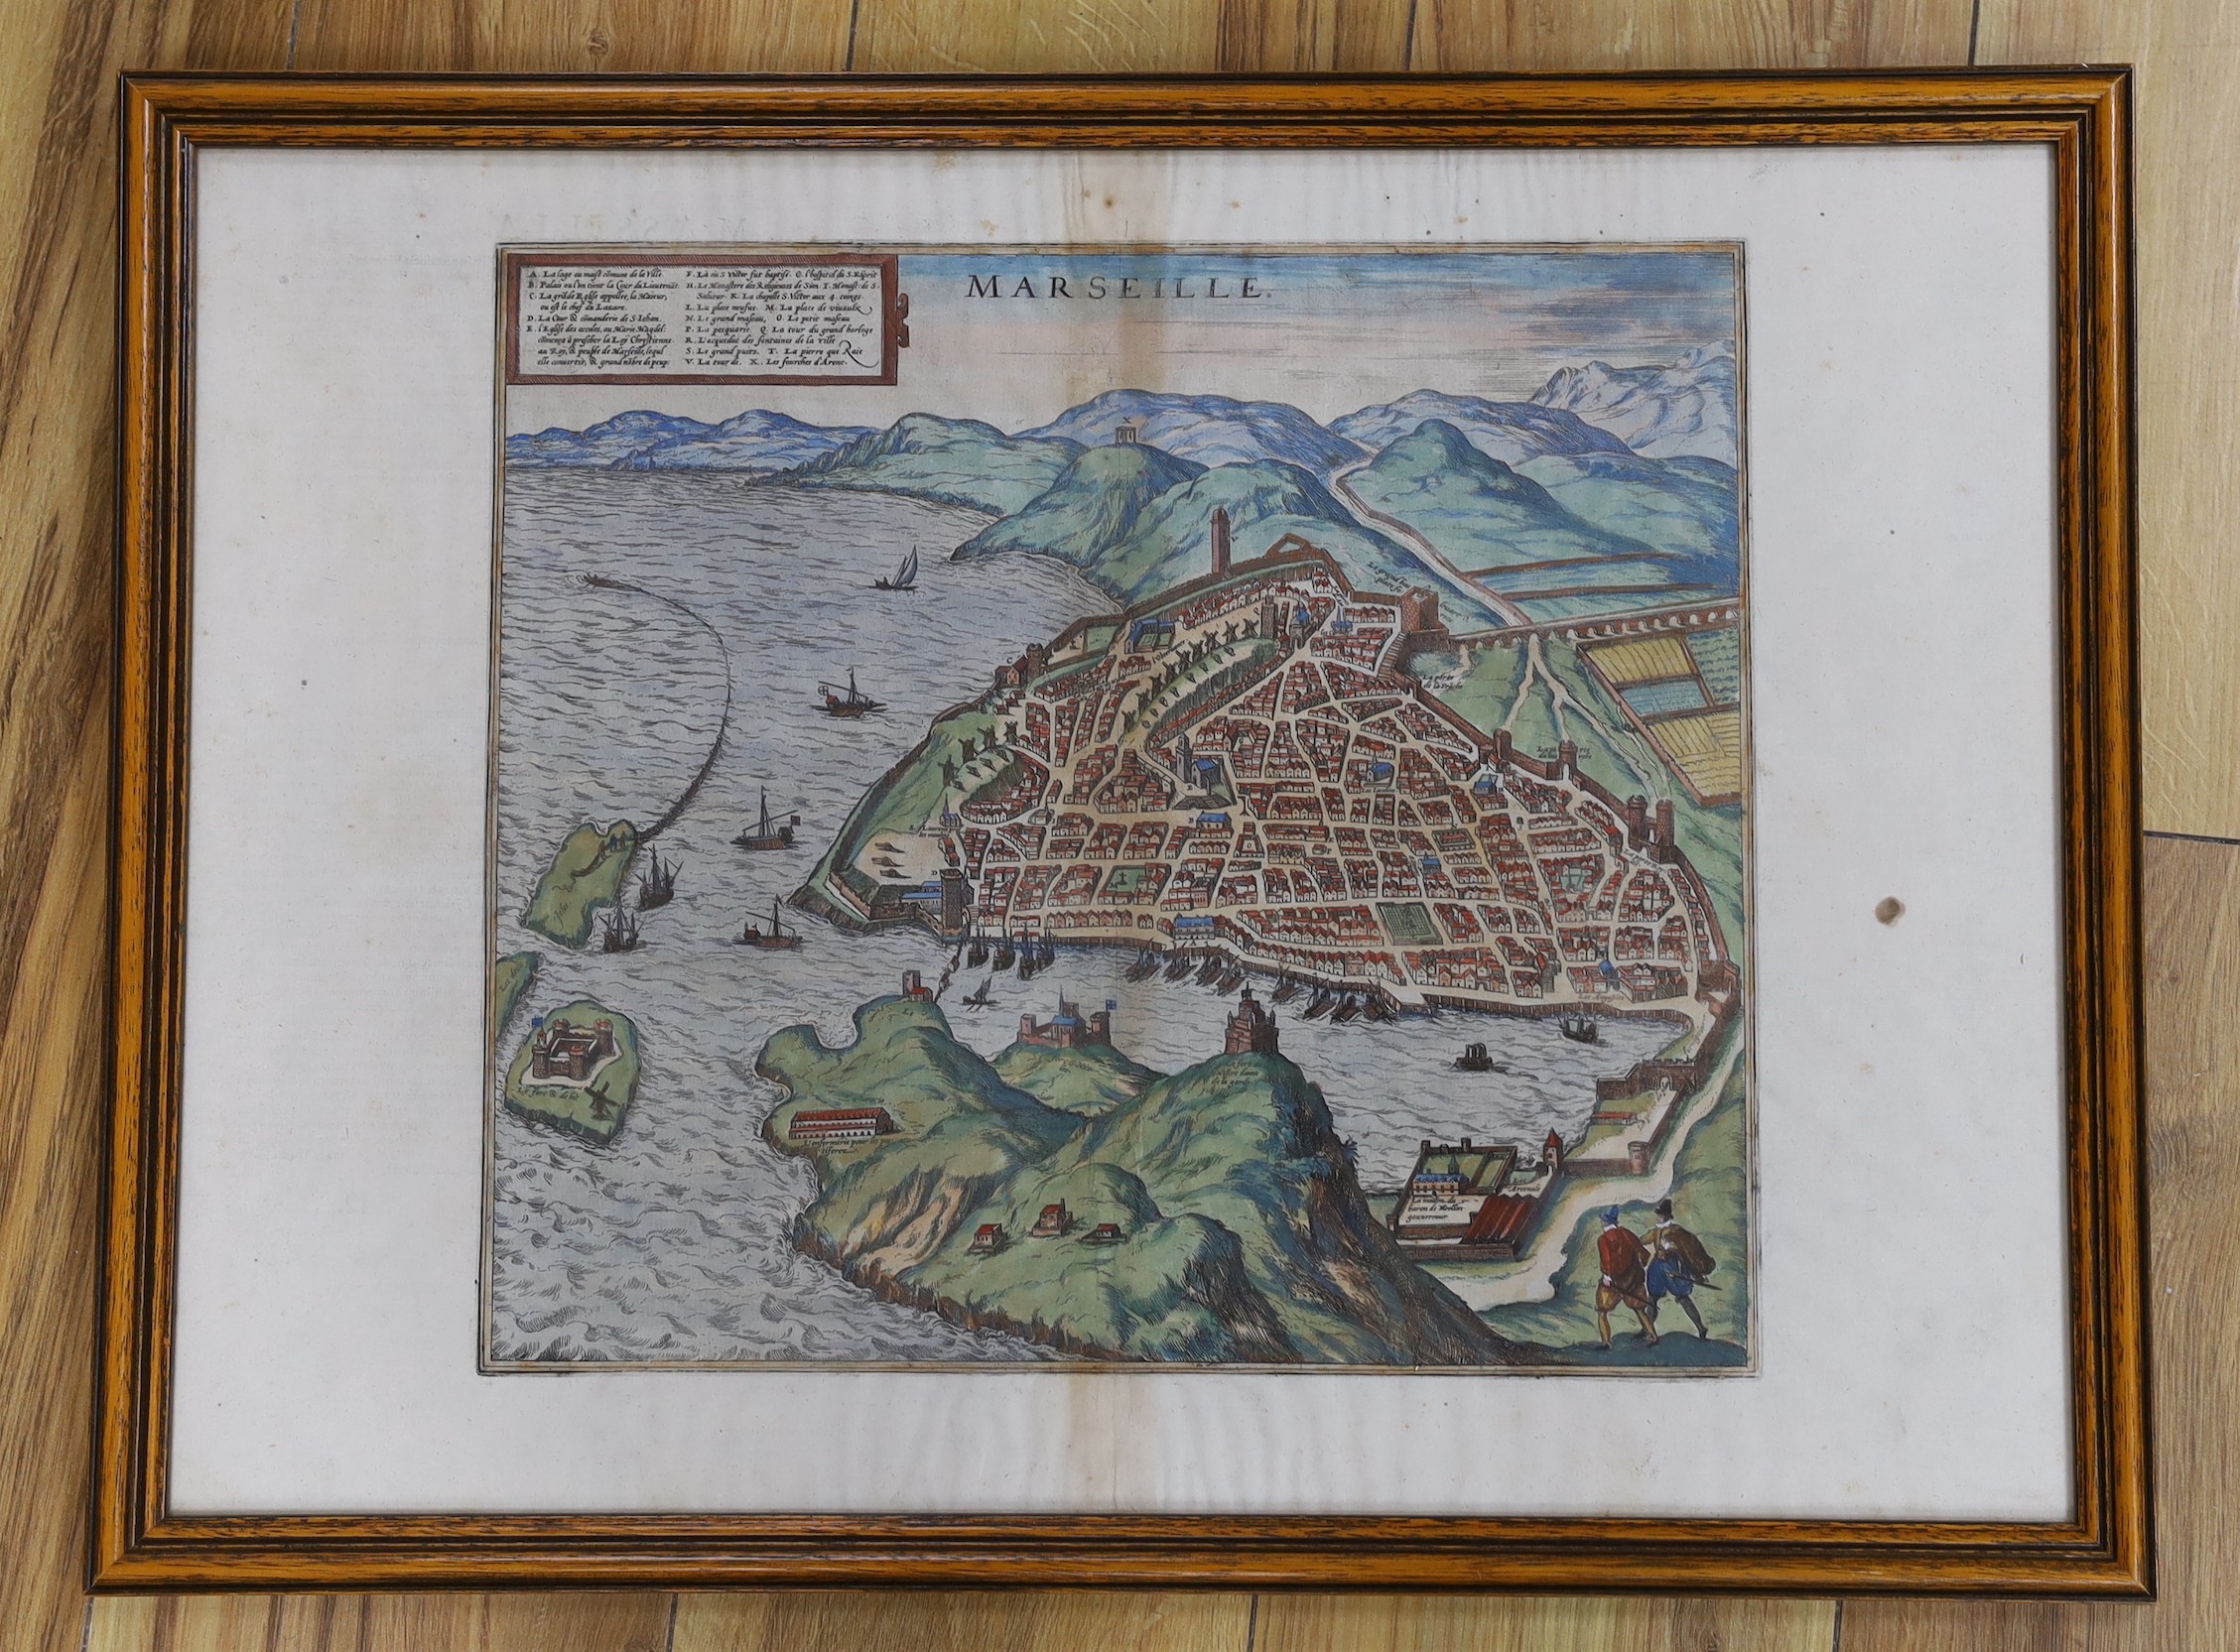 Georg Braun and Frans Hogenberg, coloured engraving, Map of Marseilles, from 'Civitates Orbis Terrarum', c.1572, latin text verso, overall 38 x 52cm